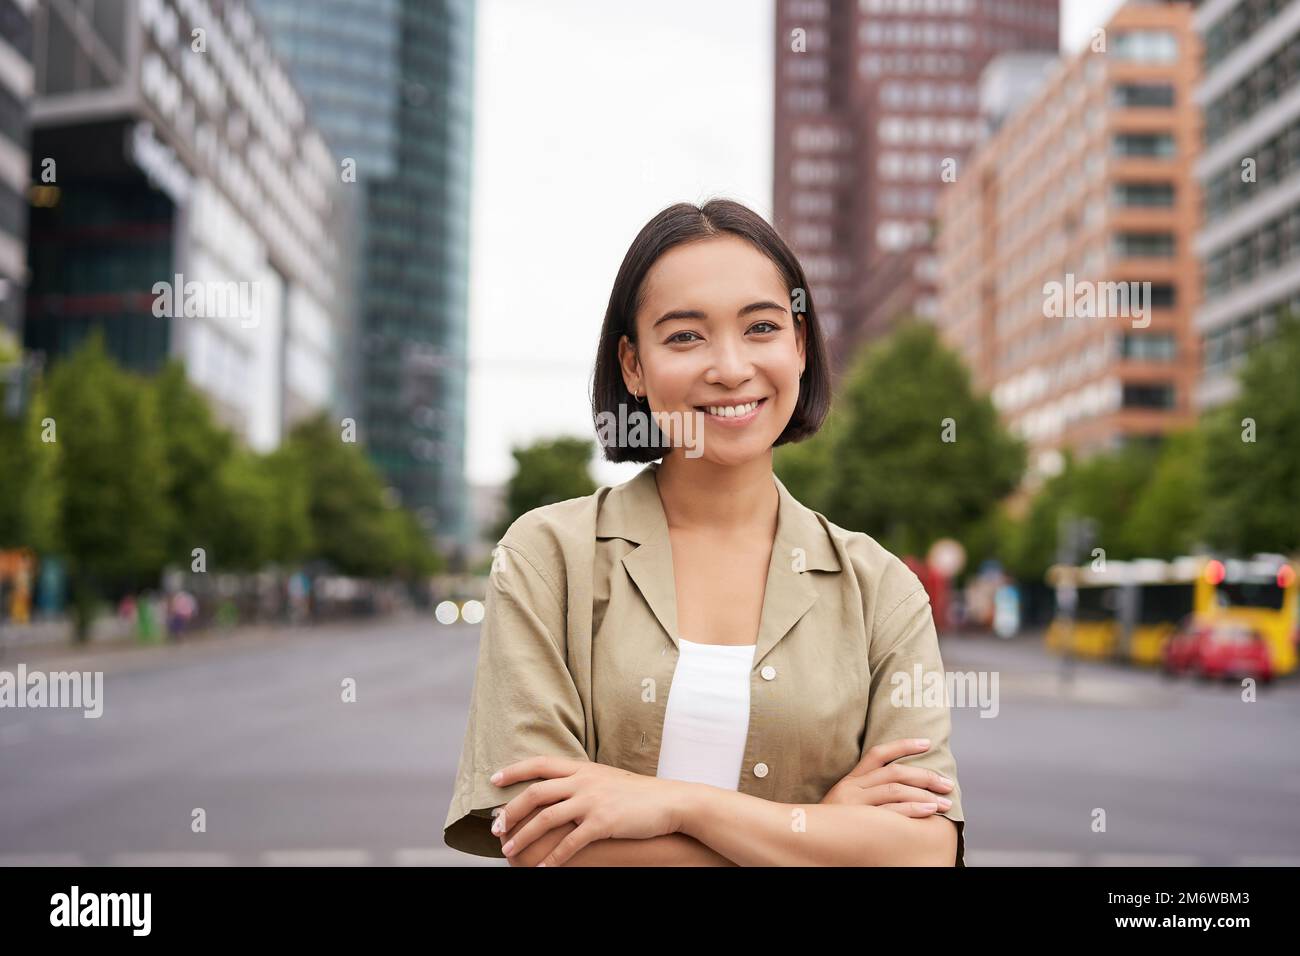 Urban people. Young happy asian girl cross arms on chest, posing on busy city street, smiling with confidence at camera Stock Photo